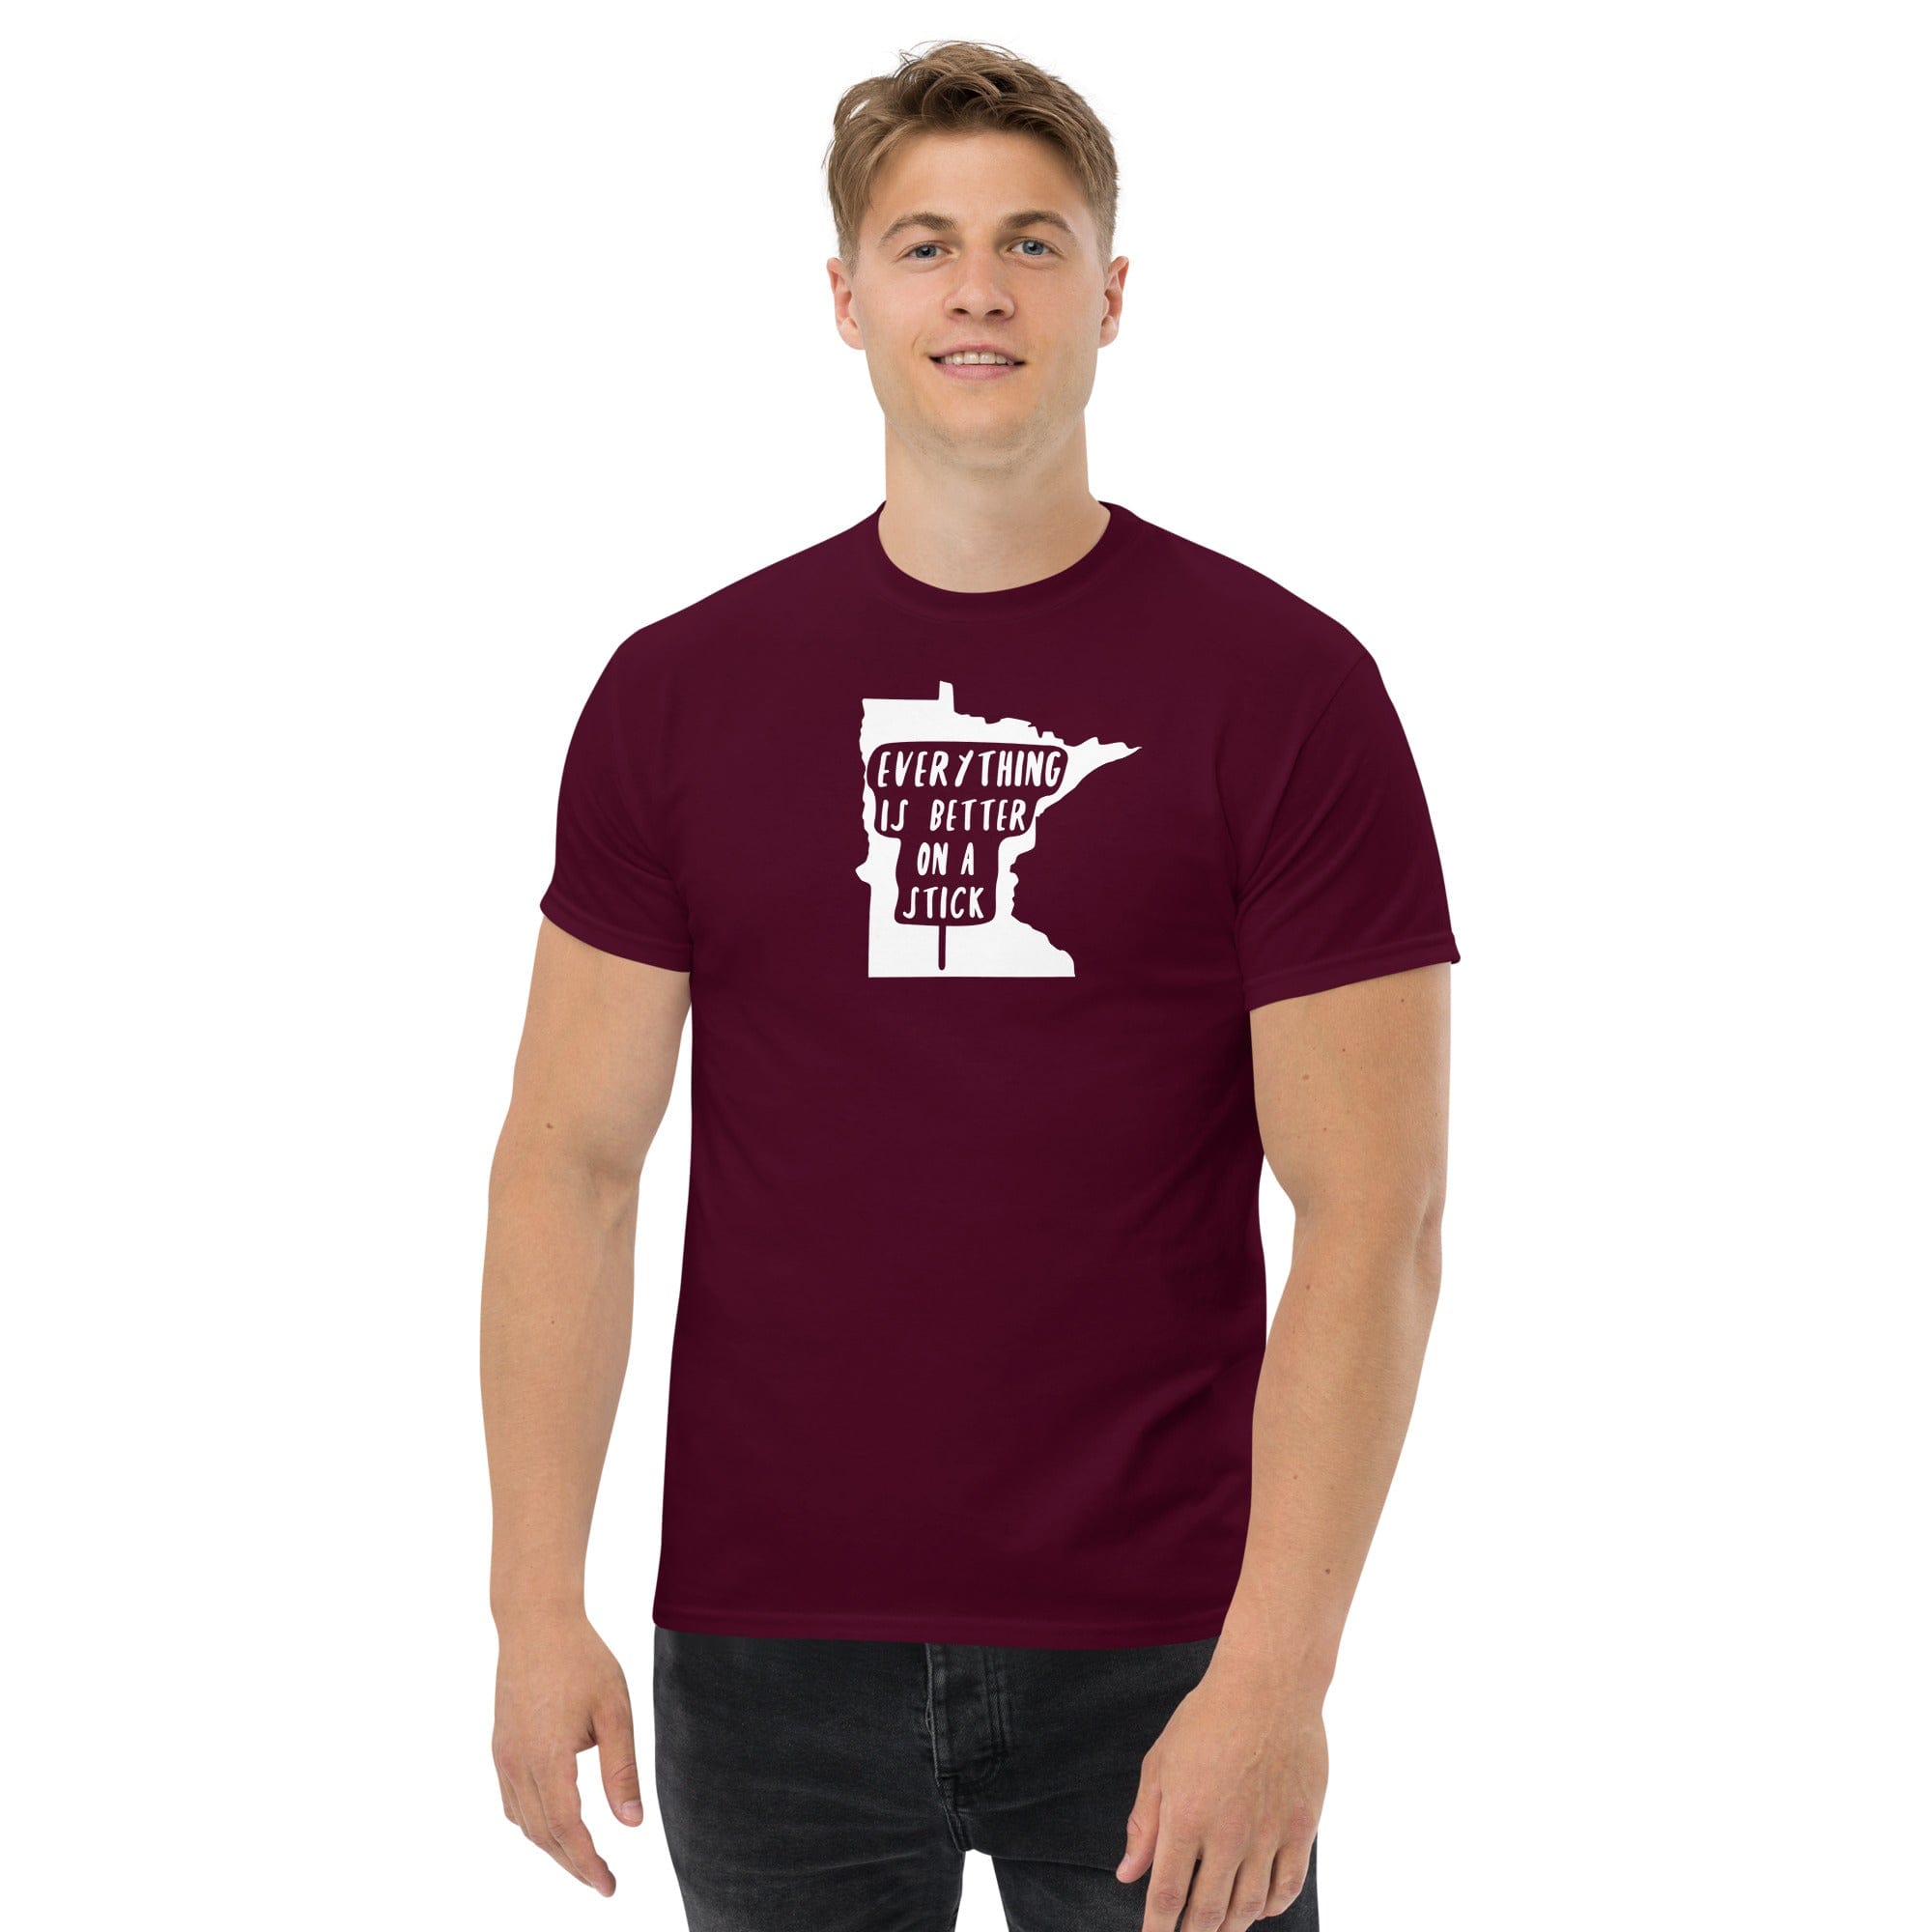 Minnesota State Fair "Everything Is Better on a Stick" Men's Classic Tee ThatMNLife Maroon / S Minnesota Custom T-Shirts and Gifts